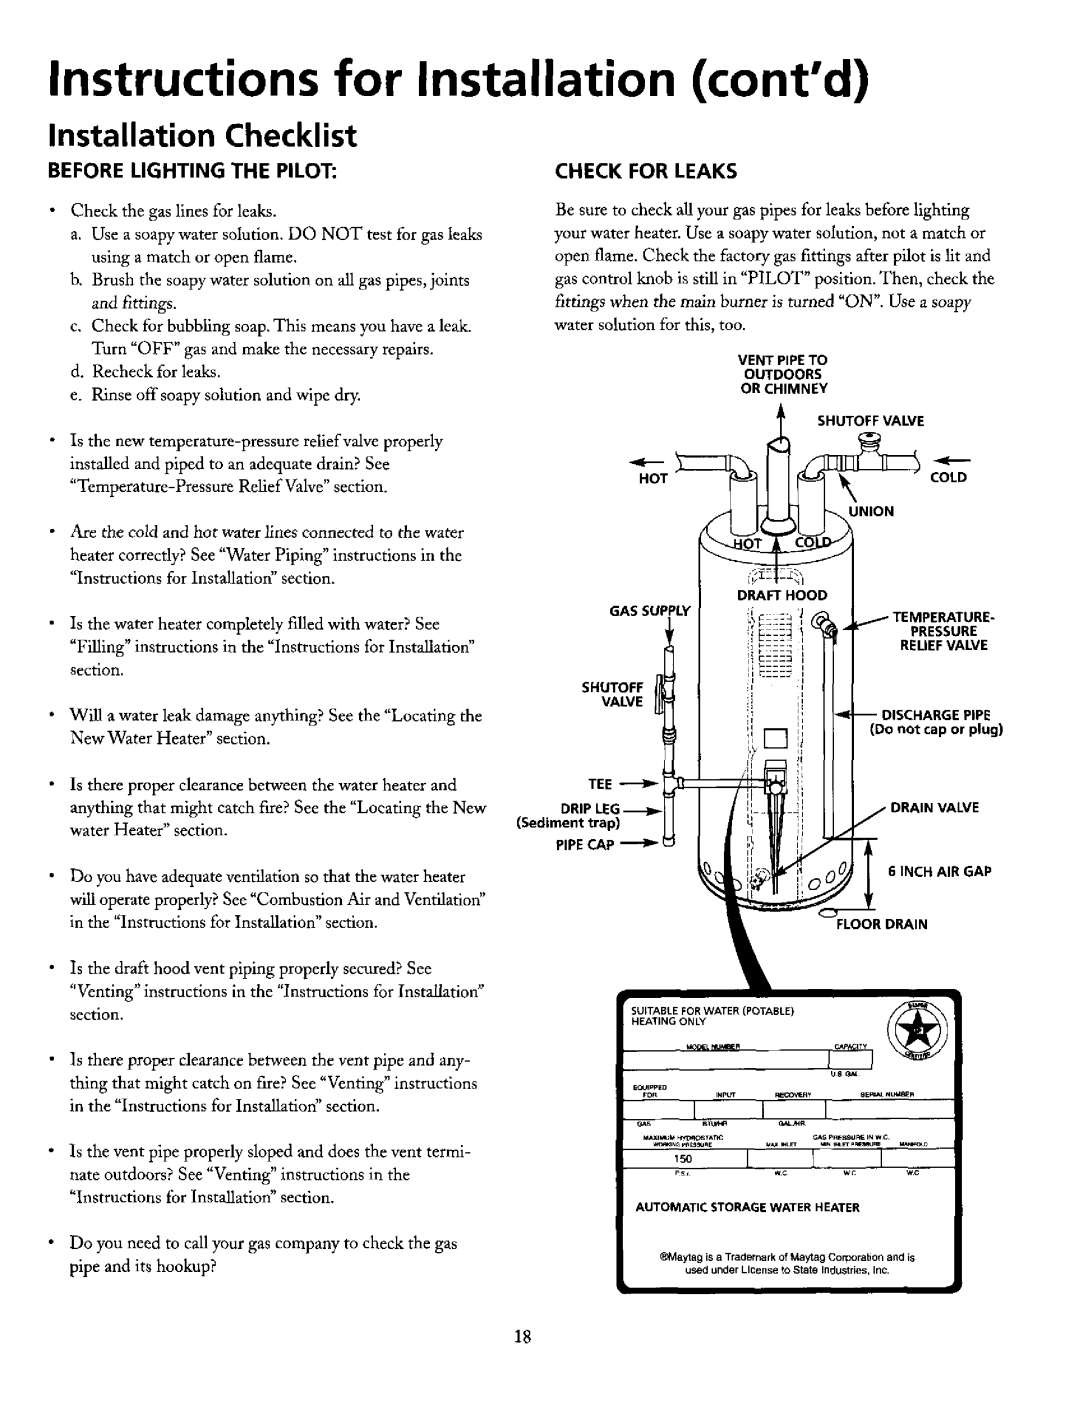 Maytag HN51240X, HN41240X Installation Checklist, Instructions for Installation contd, pipe and its hookup?, Ventpipeto 